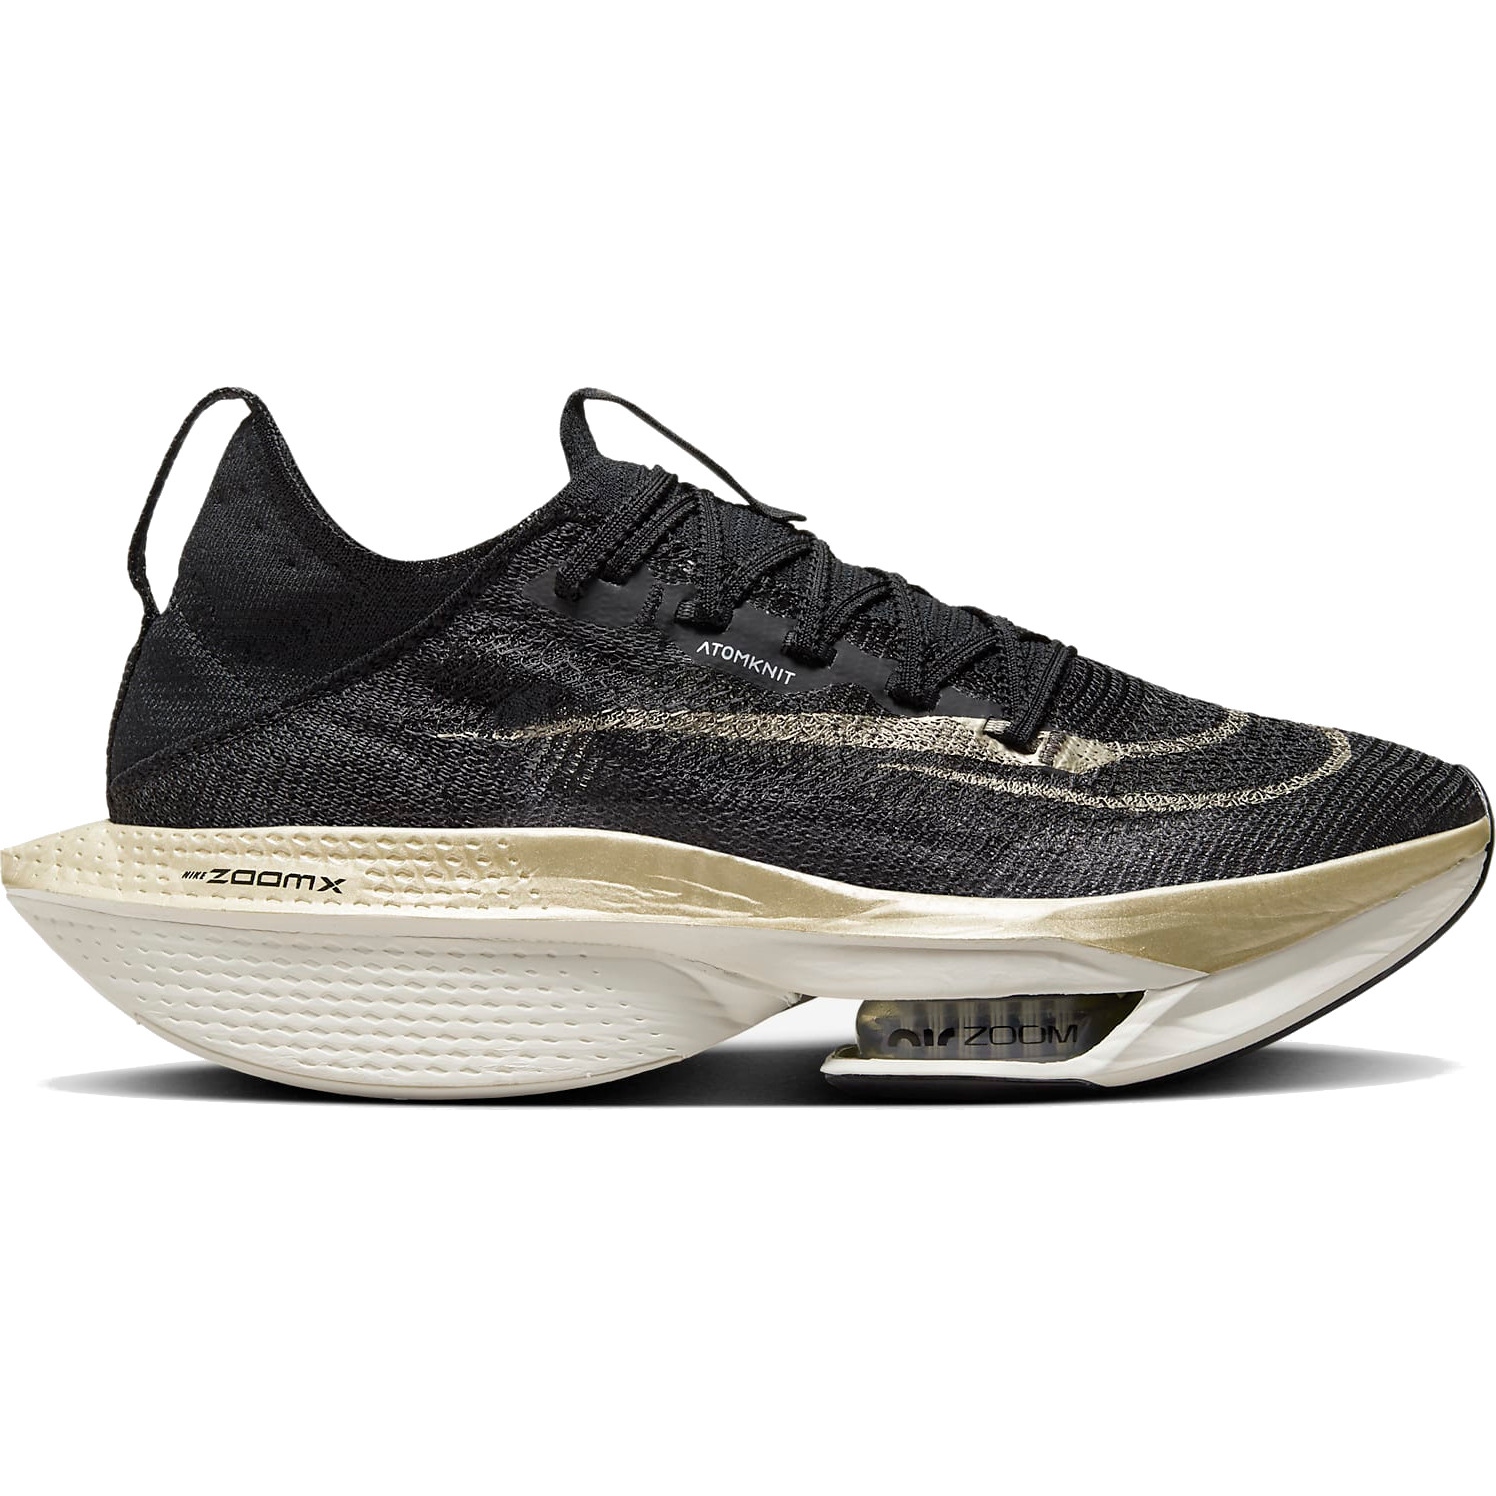 Picture of Nike Air Zoom Alphafly 2 Road Racing Shoes Men - black/sail/metalic gold grain DN3555-001